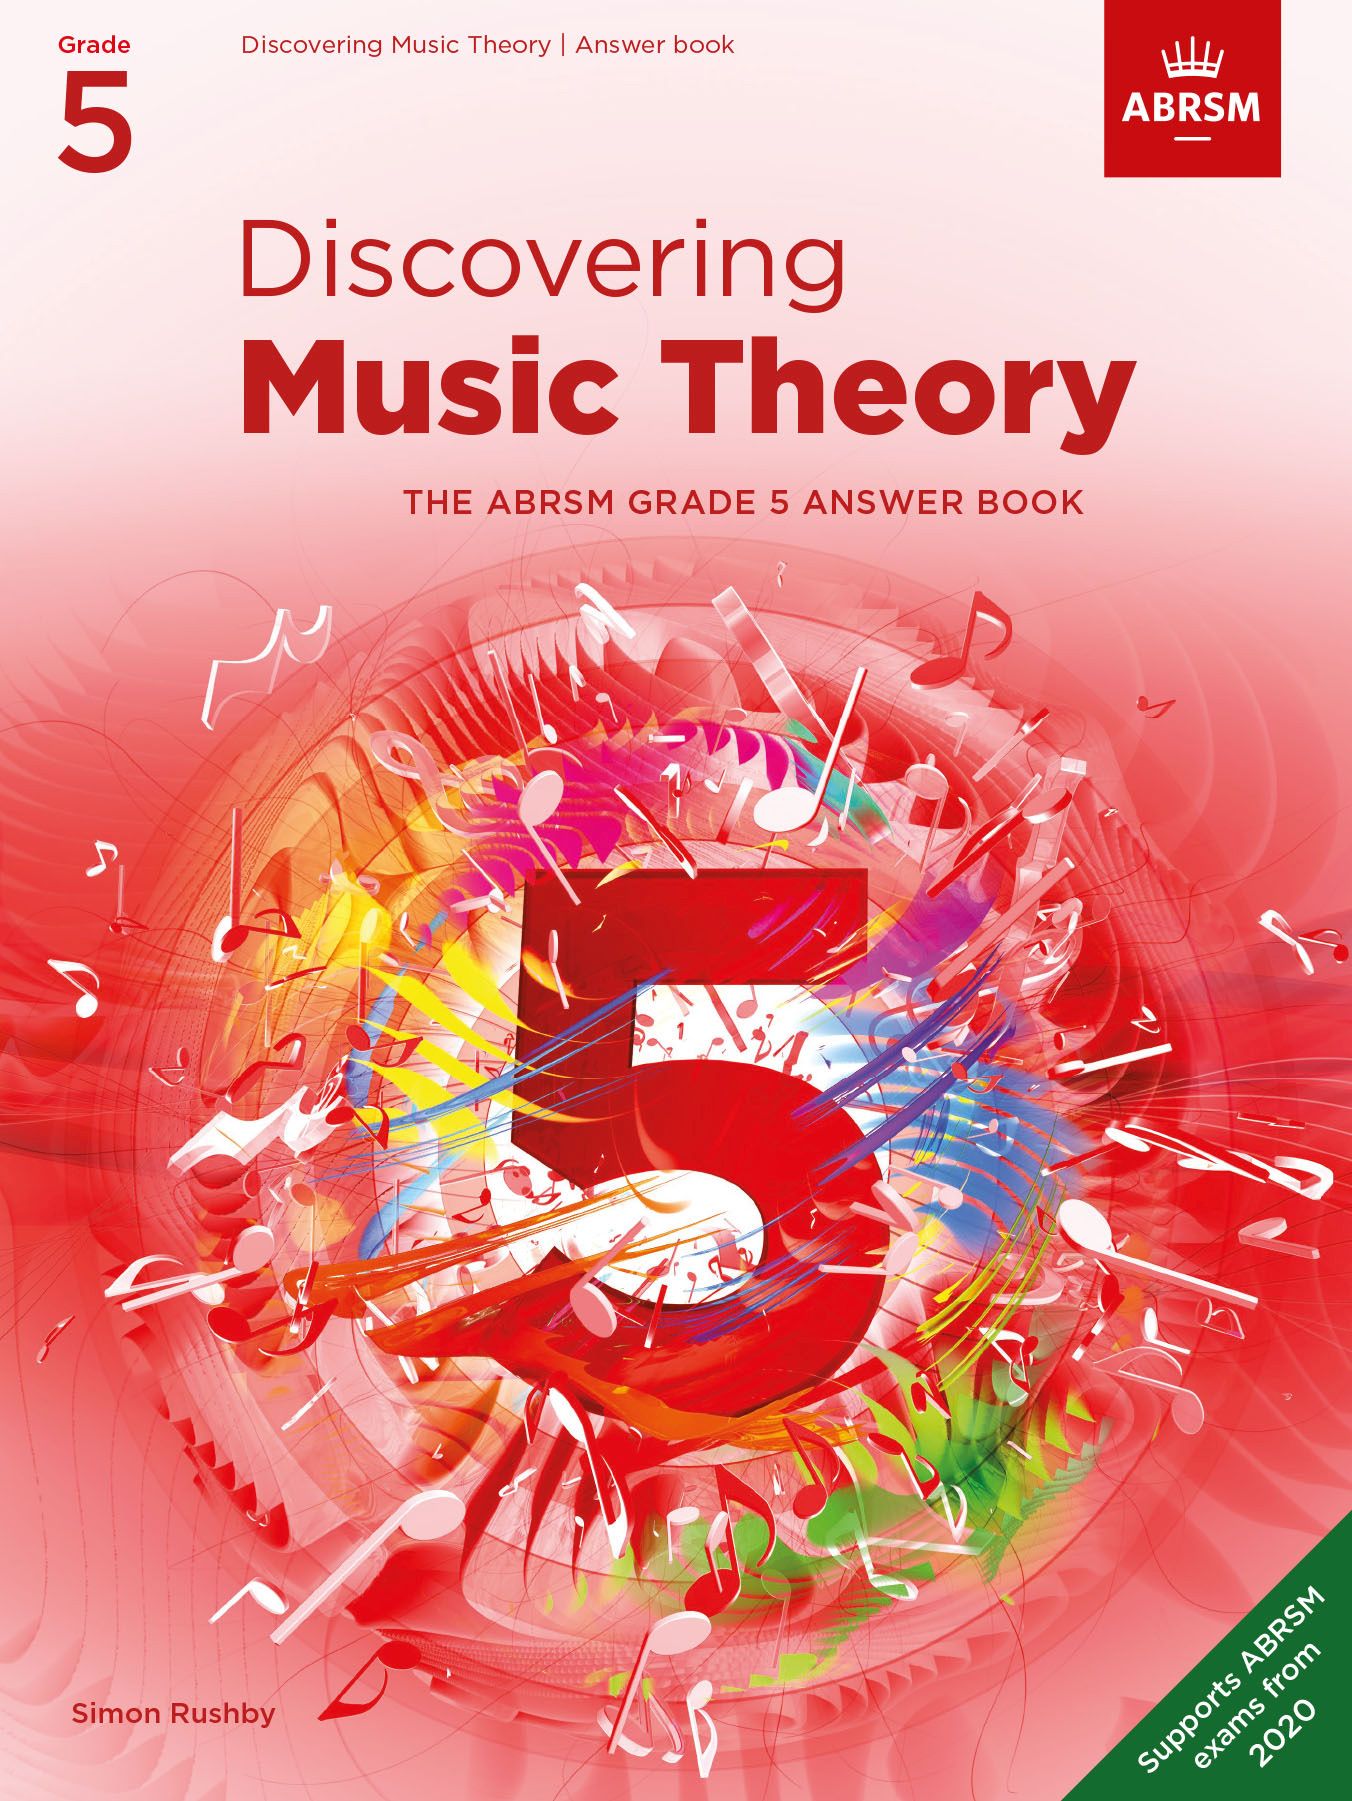 Discovering music. The book of answers. ABRSM Theory Grade 1 New Edition.